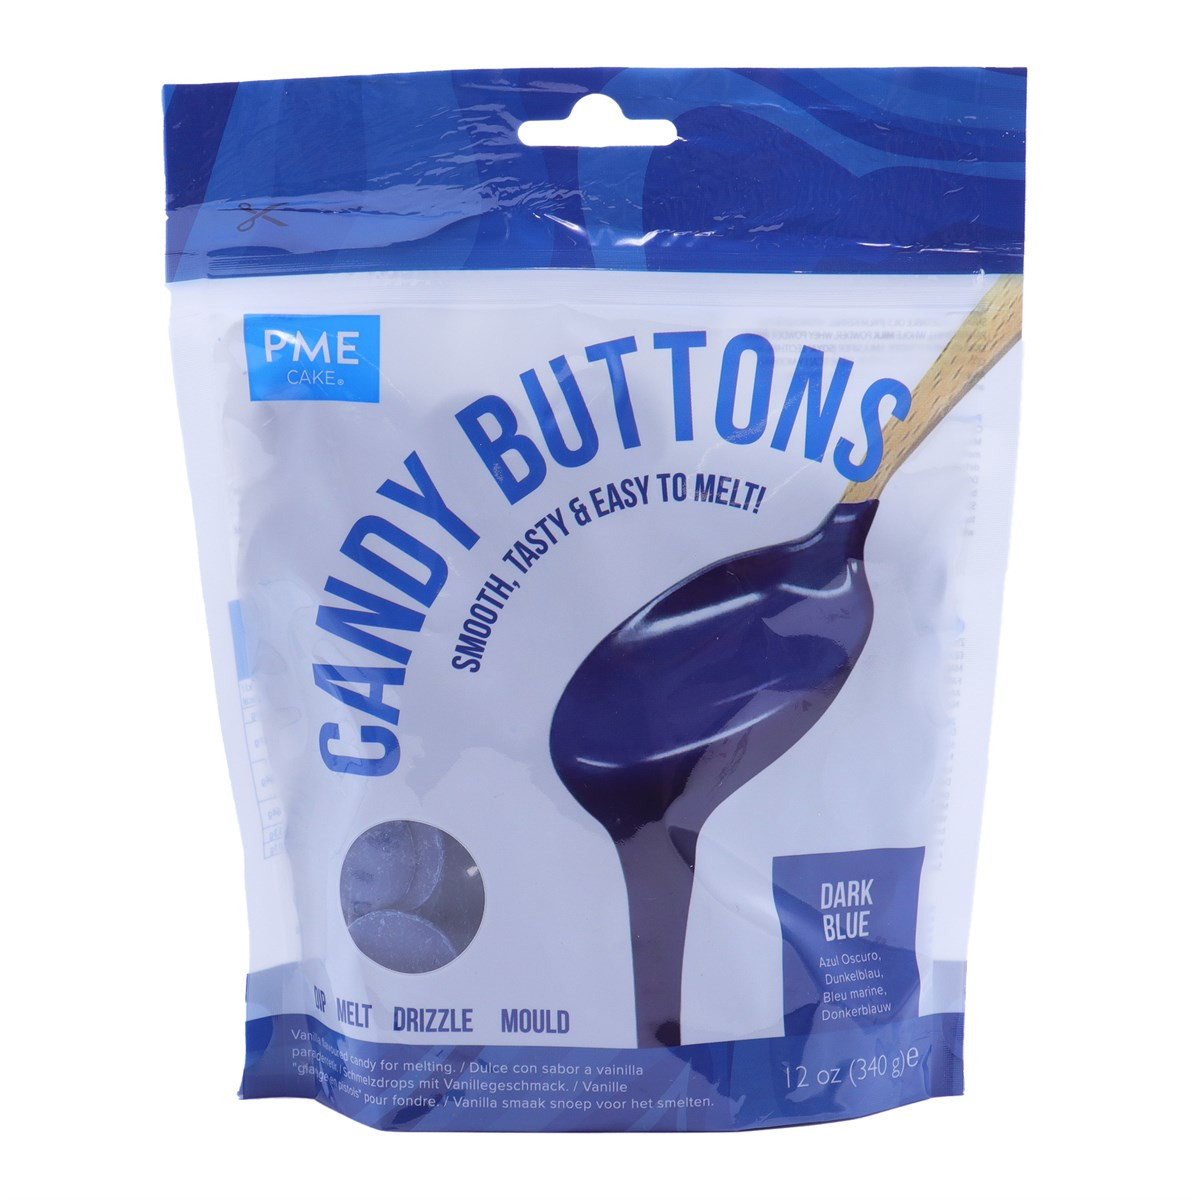 PME Candy Buttons Donkerblauw 340g